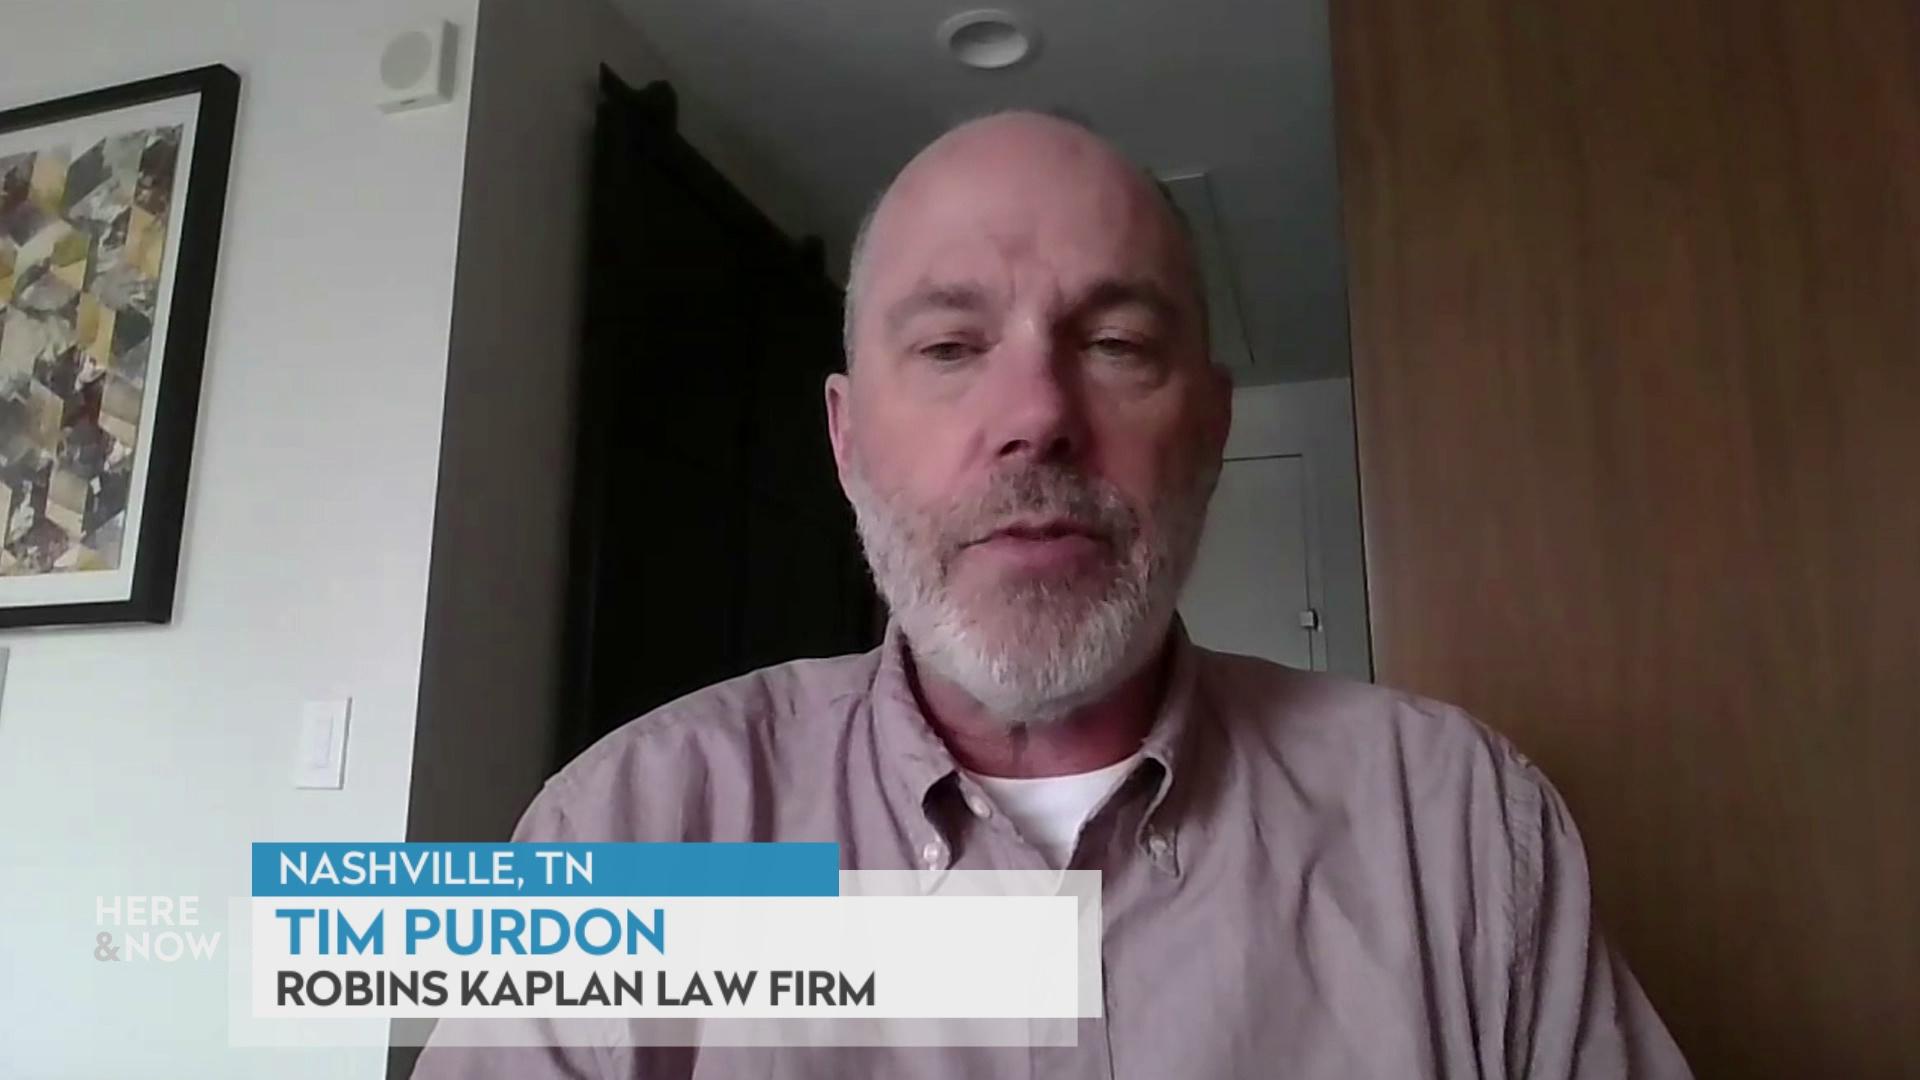 A still image from a video shows Timothy Purdon seated in front of a wooden bookshelf to his right with a graphic at bottom reading 'Nashville, TN,' 'Tim Purdon' and 'Robins Kaplan Law Firm.'